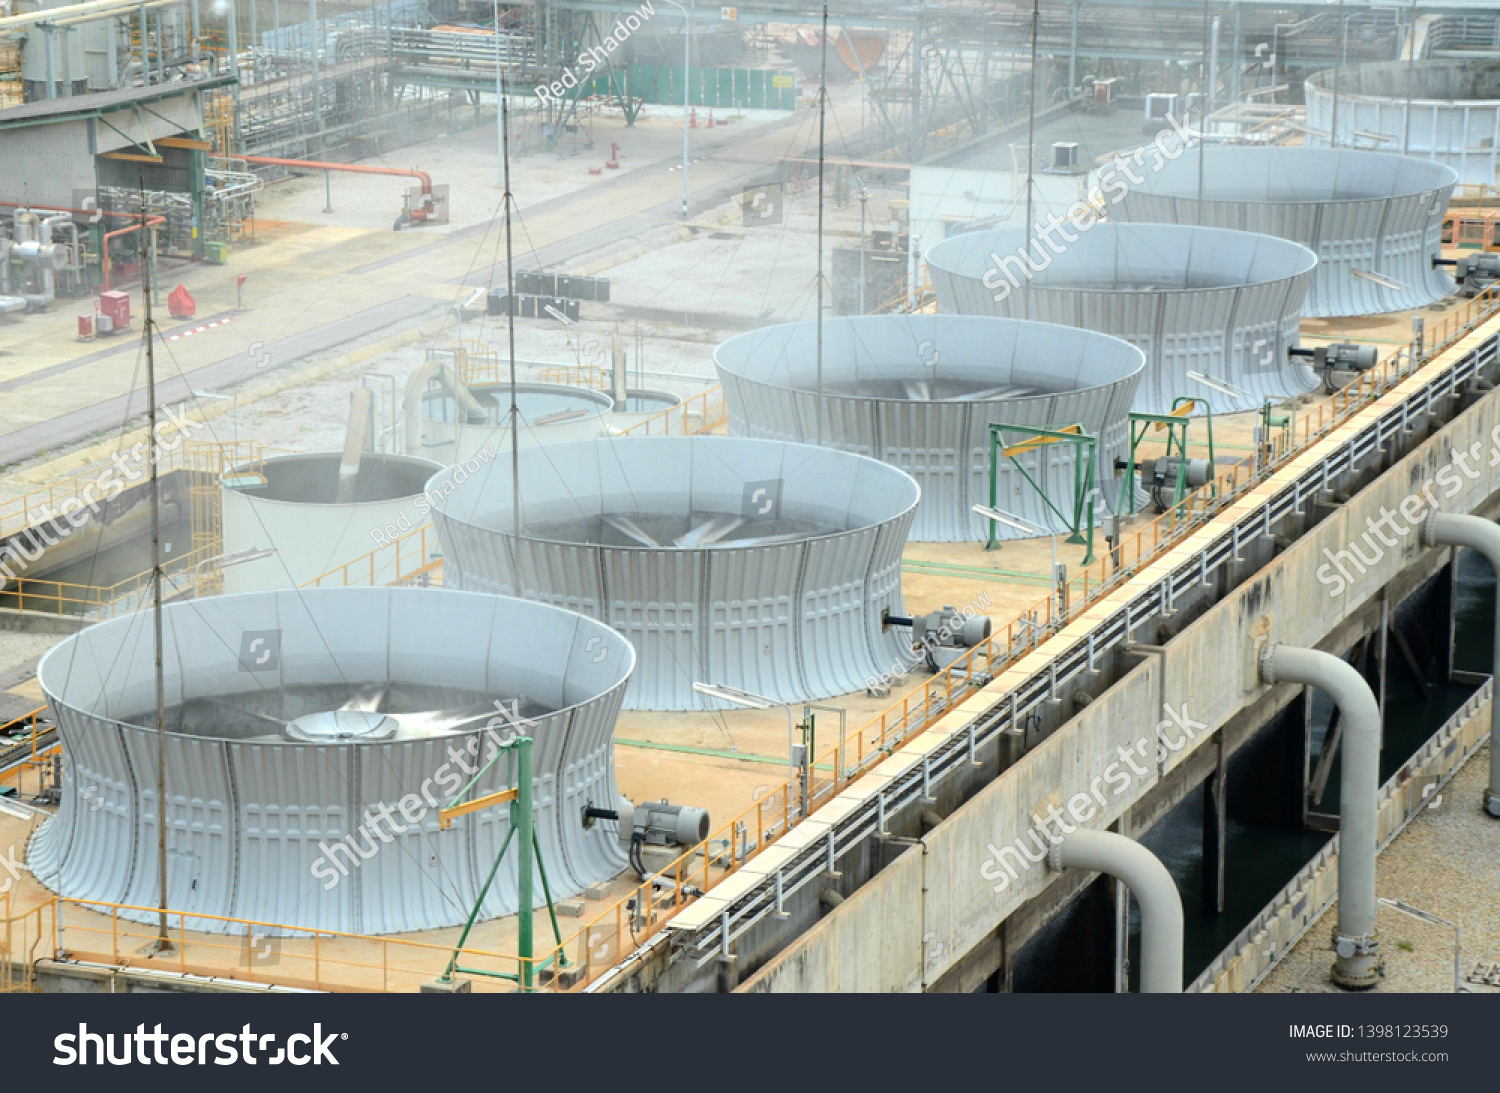 May 2019 in Rayong Thailand. cooling tower and cooling fan blowing steam on the air in chemical plant,  refinery plant, oil and gas plant during operation. #1398123539